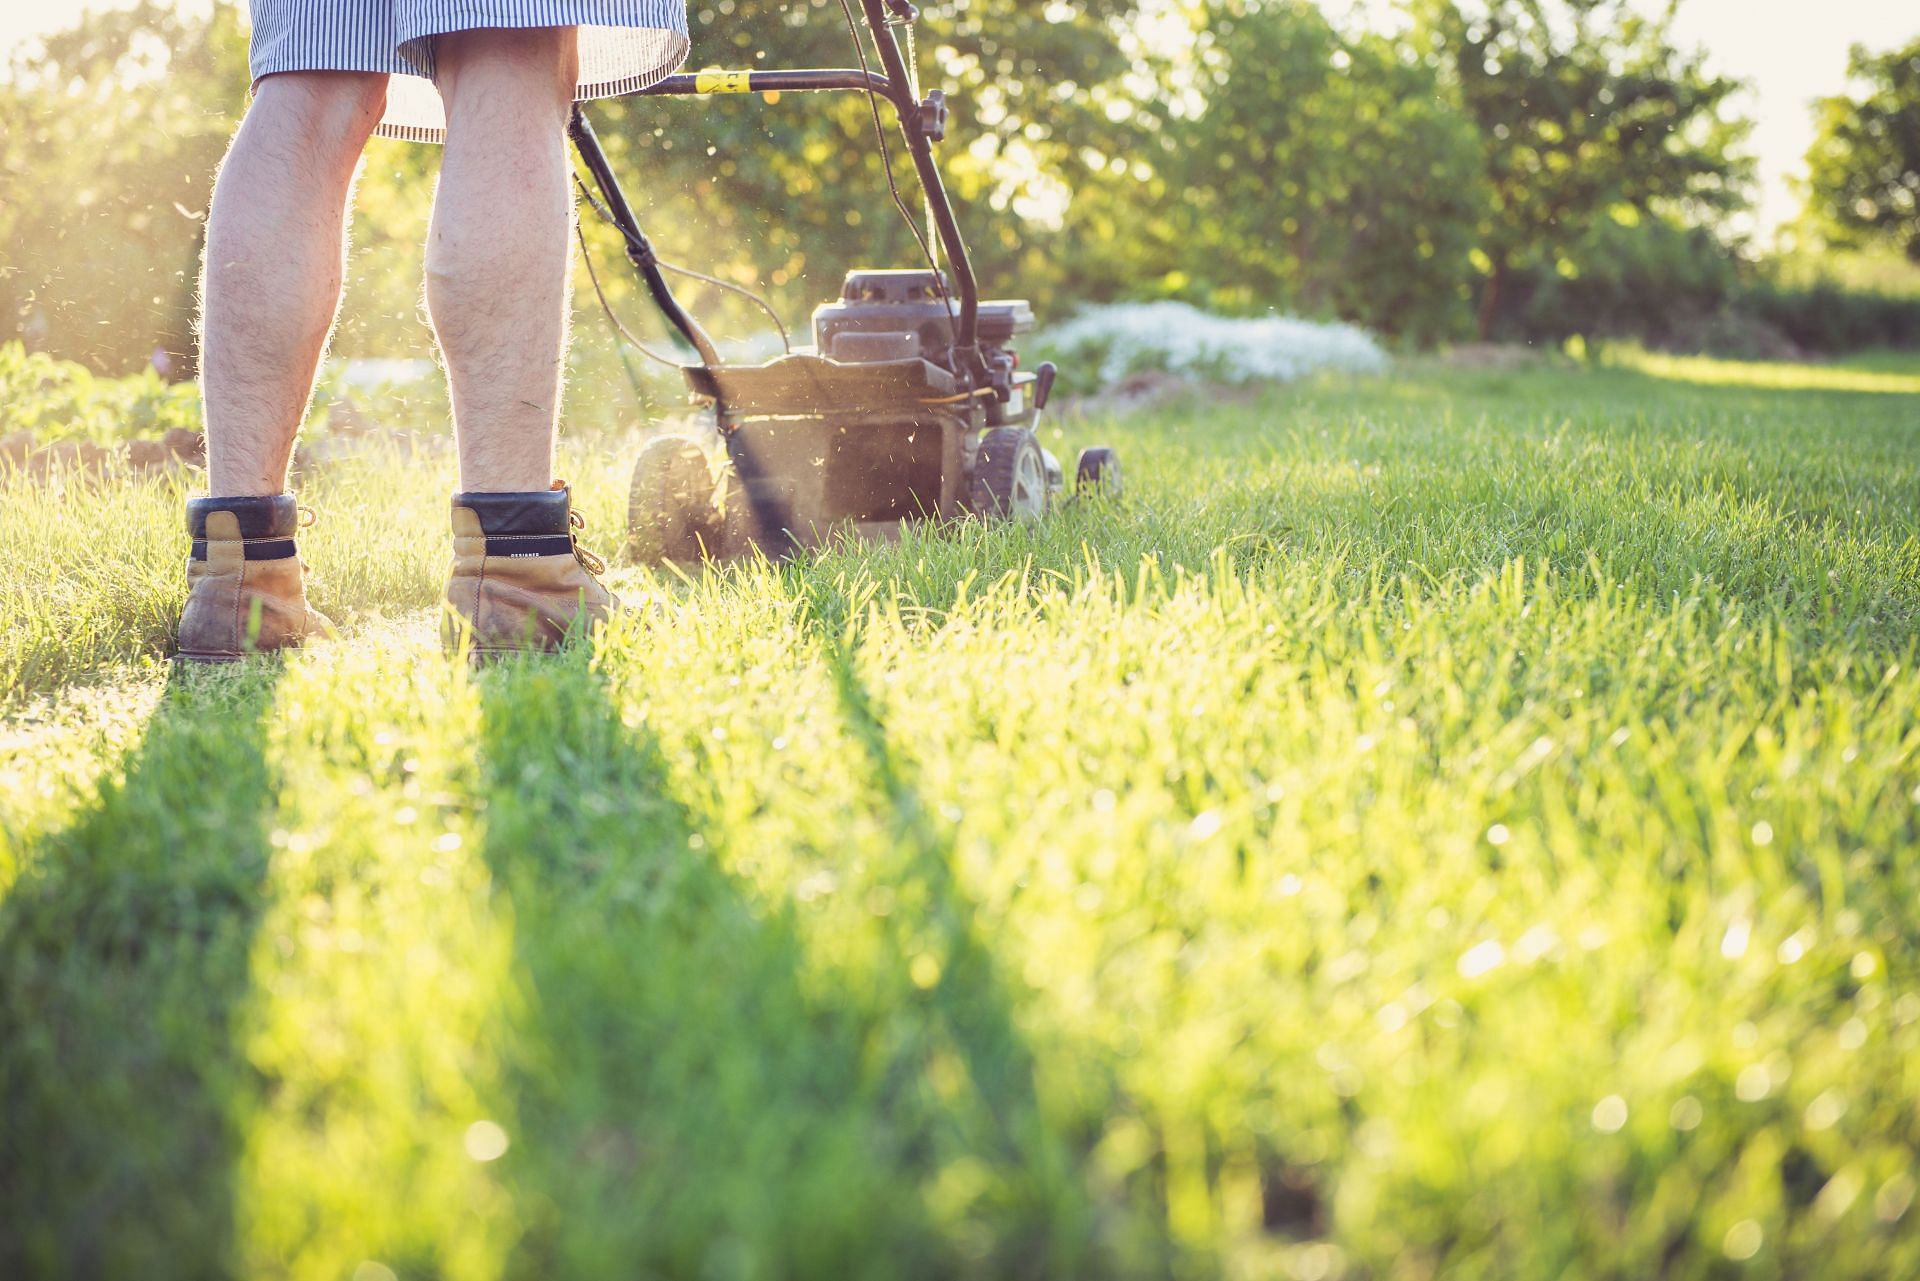 Mowing your lawn is a good outdoor activity to burn some calories (Pic from Pexels @Magic K)